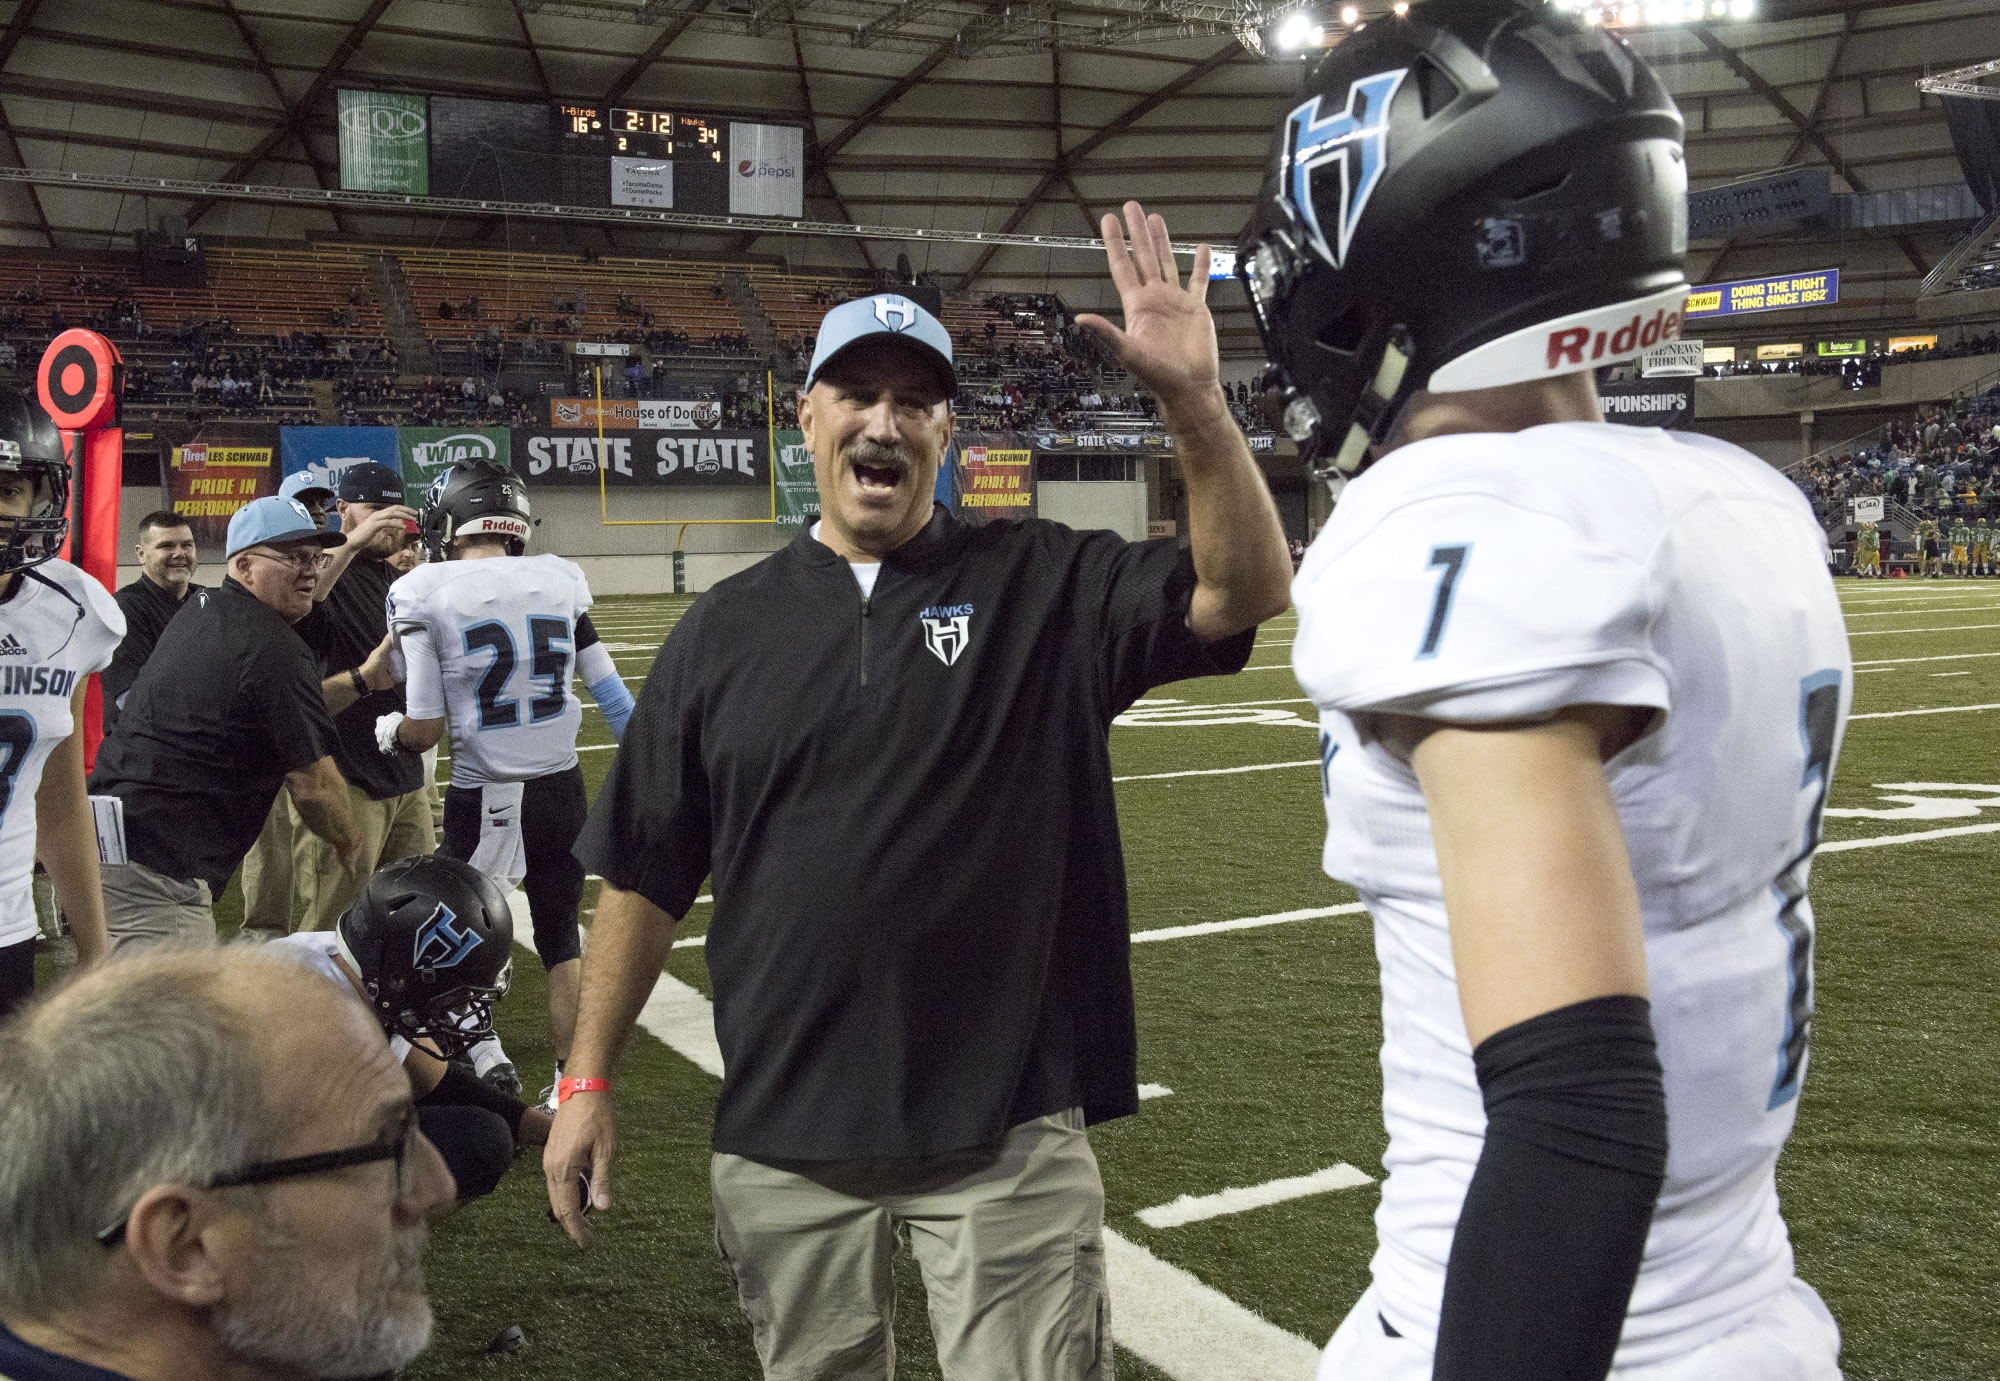 Hockinson head coach Rick Steele congratulates Aidan Mallory (1) after Mallory's interception and touchdown against Tumwater during the 2A state football championship game Saturday, Dec. 2, 2017, in Tacoma, Wash.